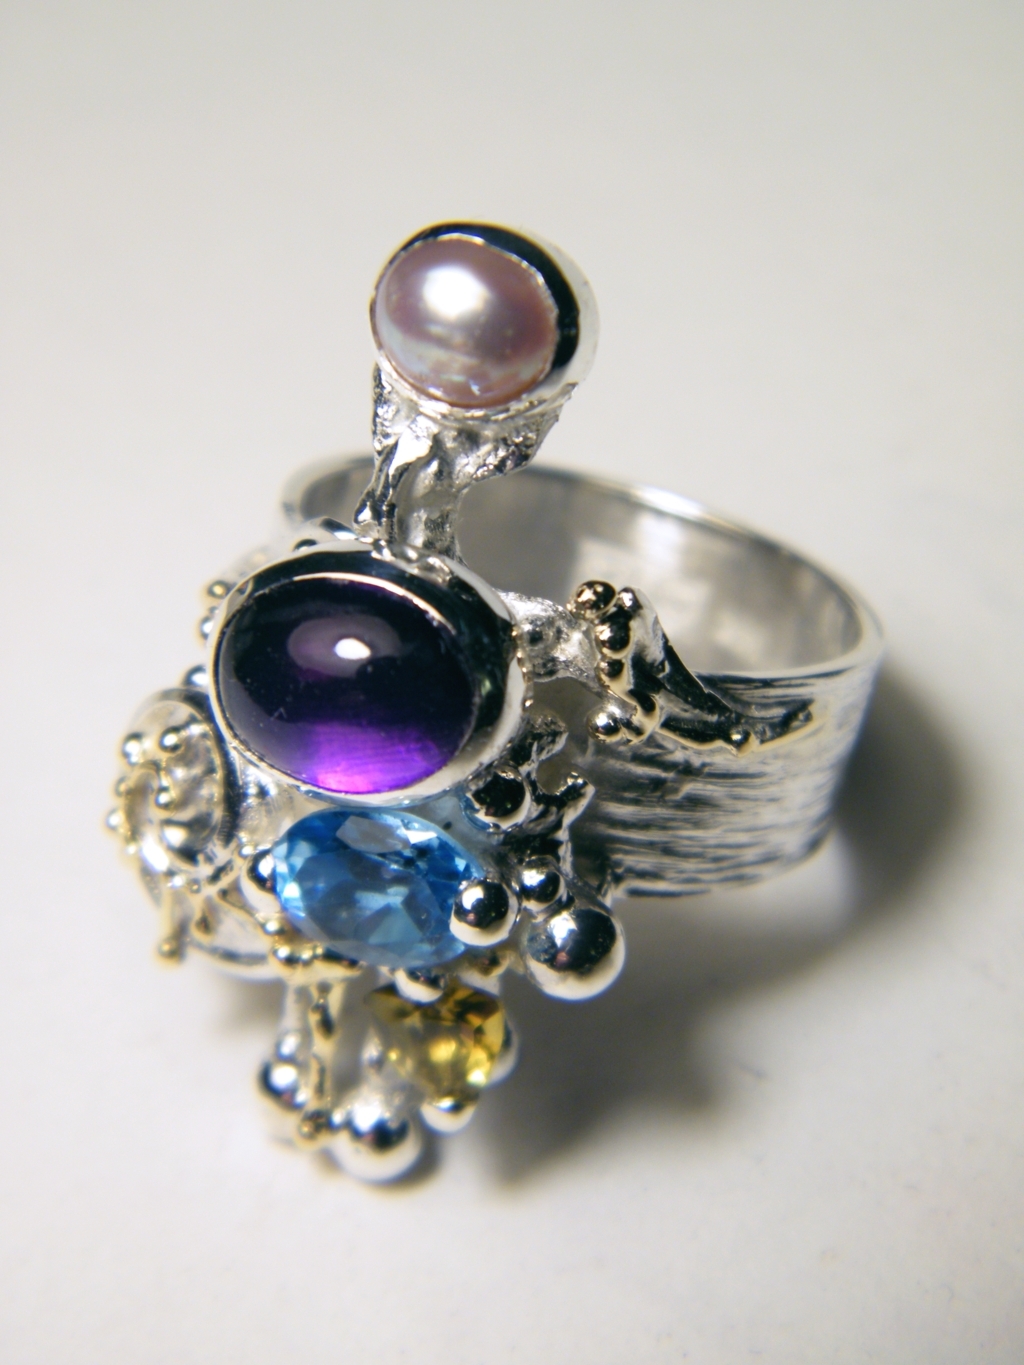 gregory pyra piro one of a kind ring 4020, mixed metal one of a kind jewellery, silver and gold mixed metal jewellery, rings for women with blue topaz and pearl, rings for women with amethyst and peridot, rings for women with blue topaz and peridot, rings for women with amethyst and blue topaz, rings in art and craft galleries